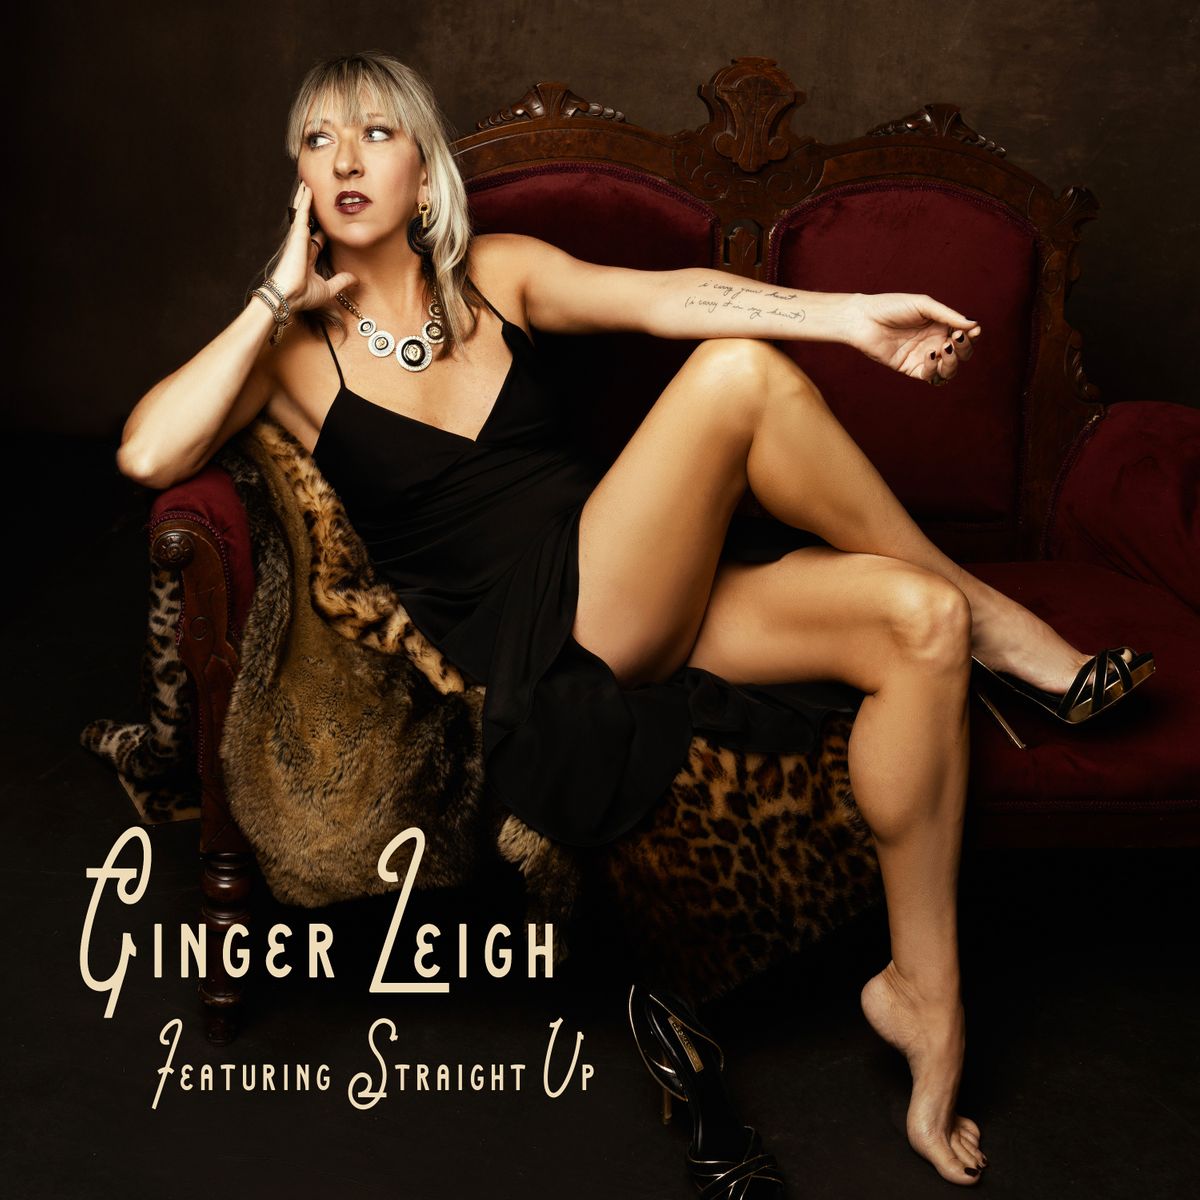 Ginger-Leigh-Featuring-Straight-Up-EP-Artwork copy.jpg